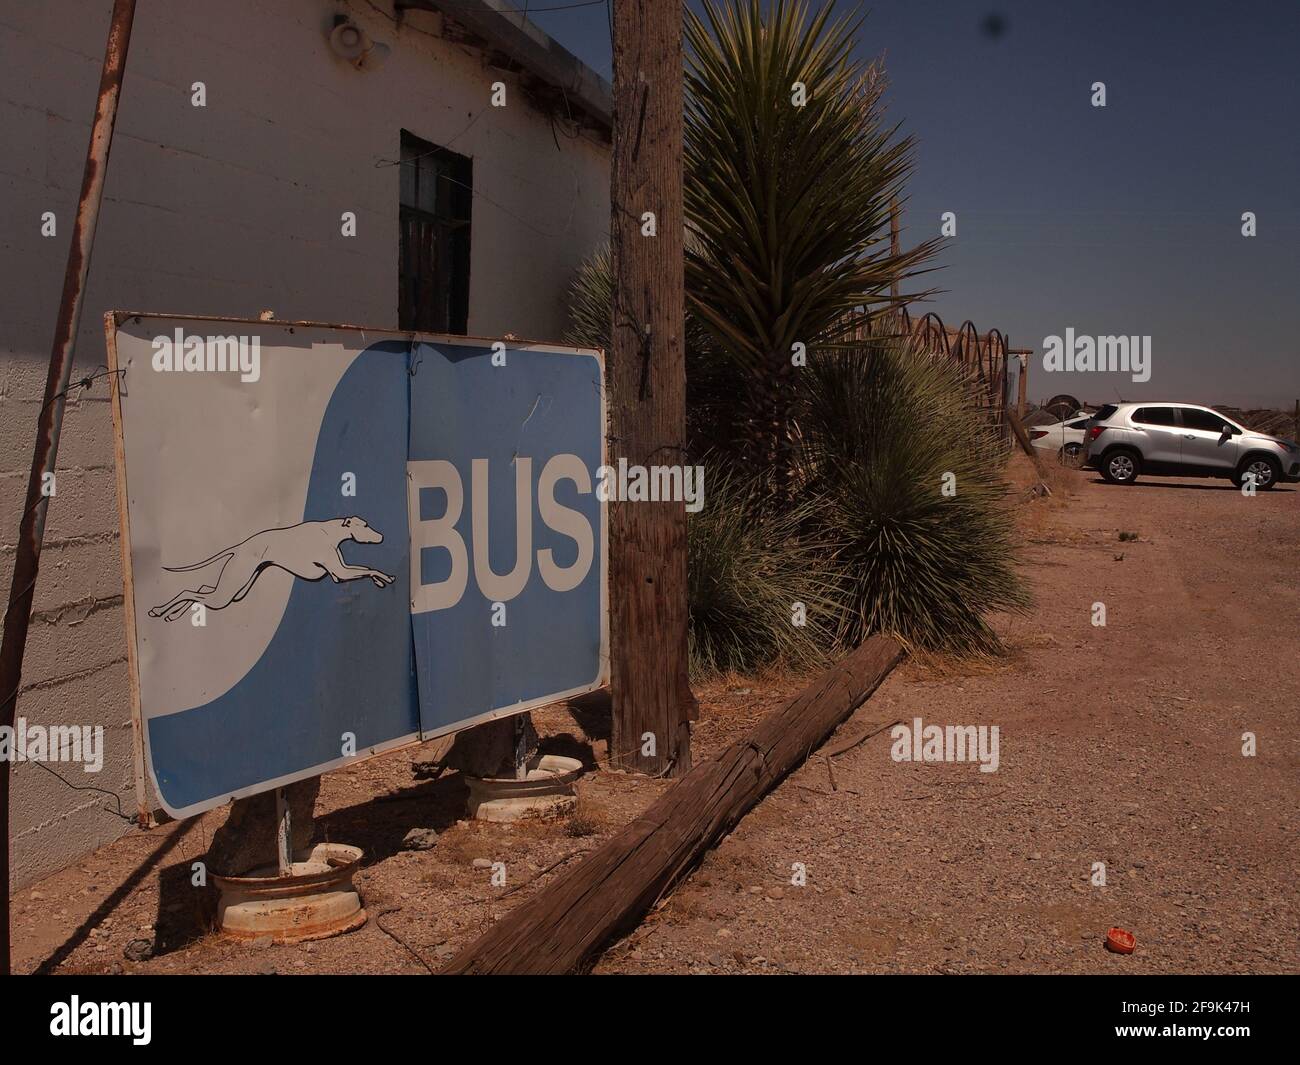 Greyhound bus stop at the Salt Flat Cafe in West Texas along highway 180/62. Last stop before El Paso, nearly 80 miles away. Stock Photo